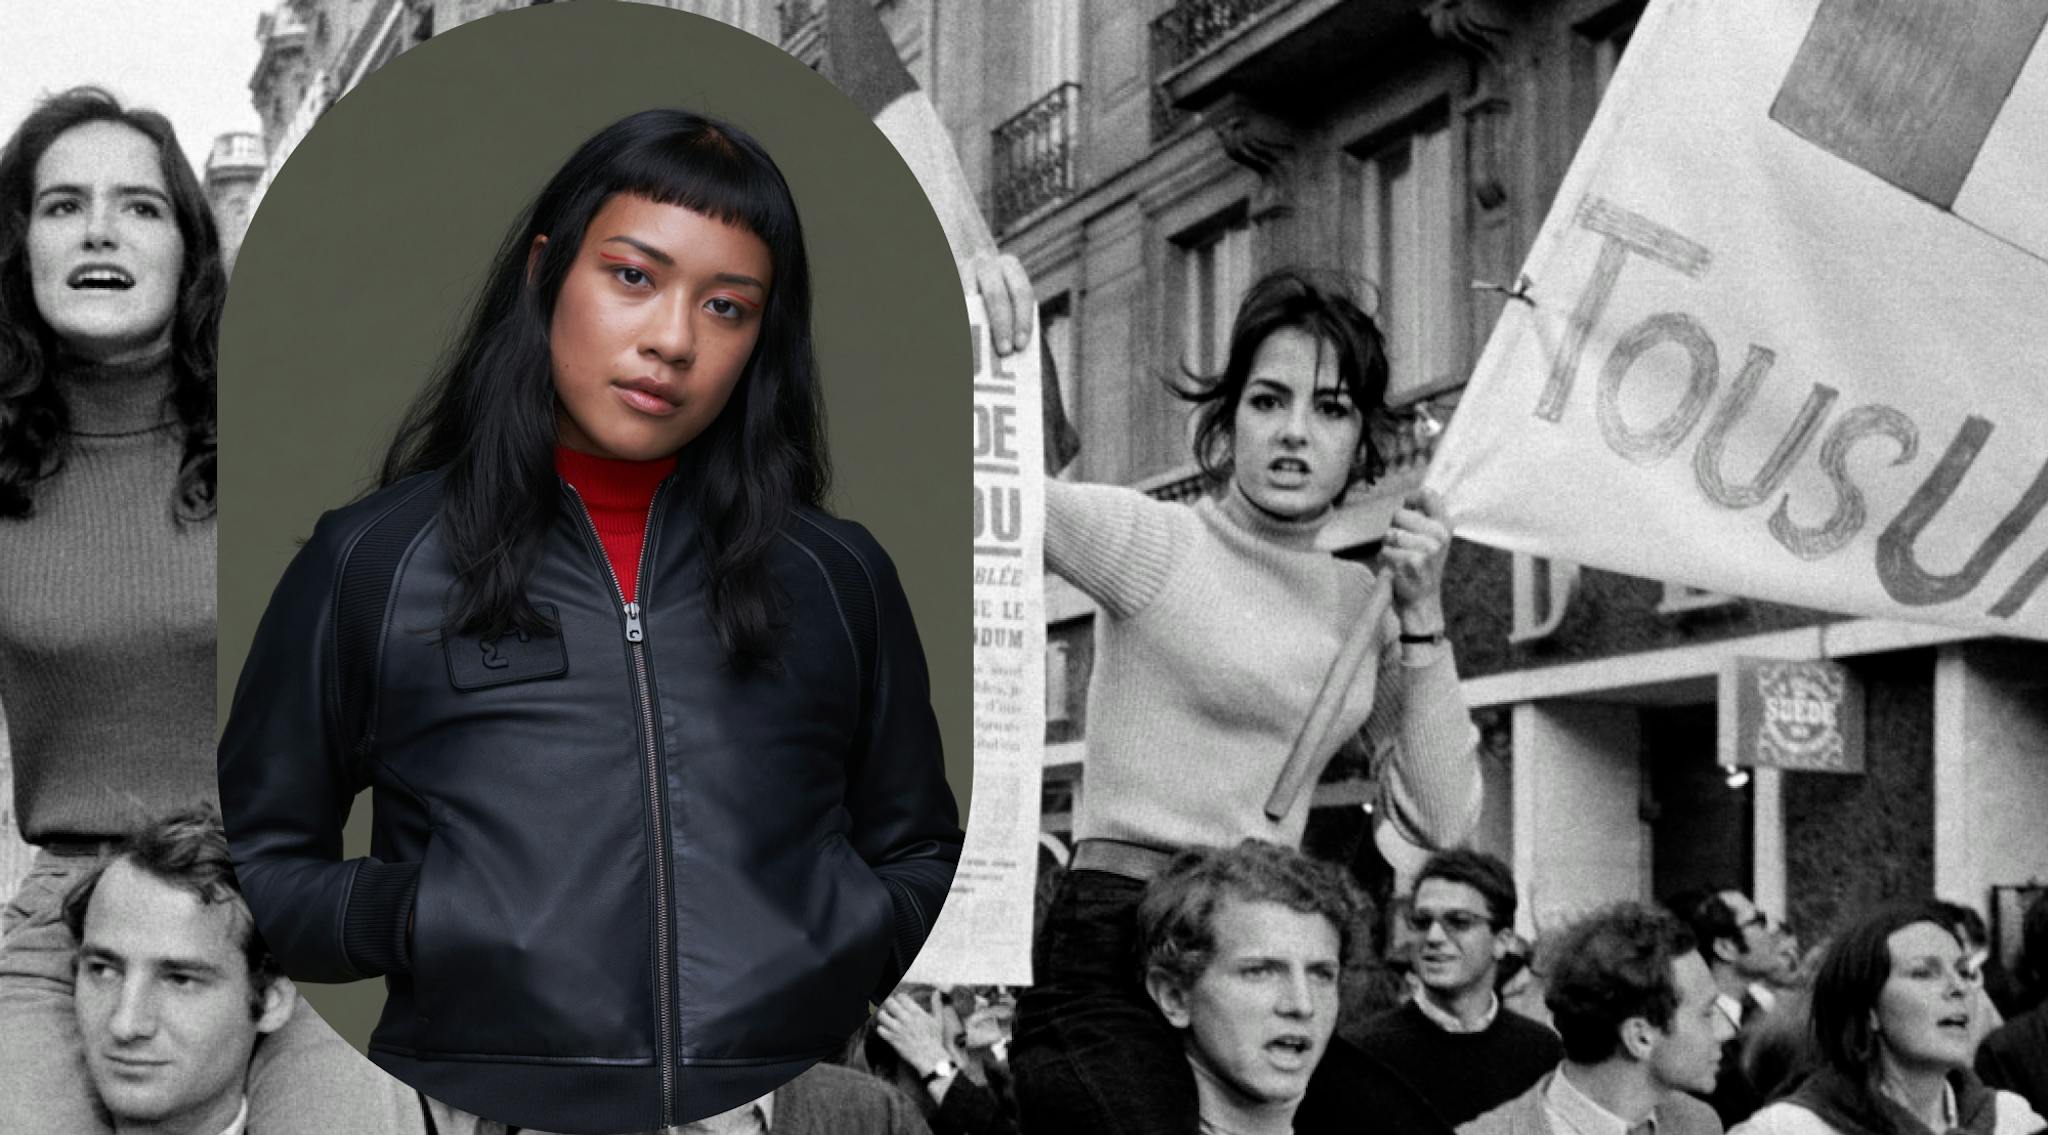 A collage of a group of student protestors in Paris and a woman in a black bomber jacket